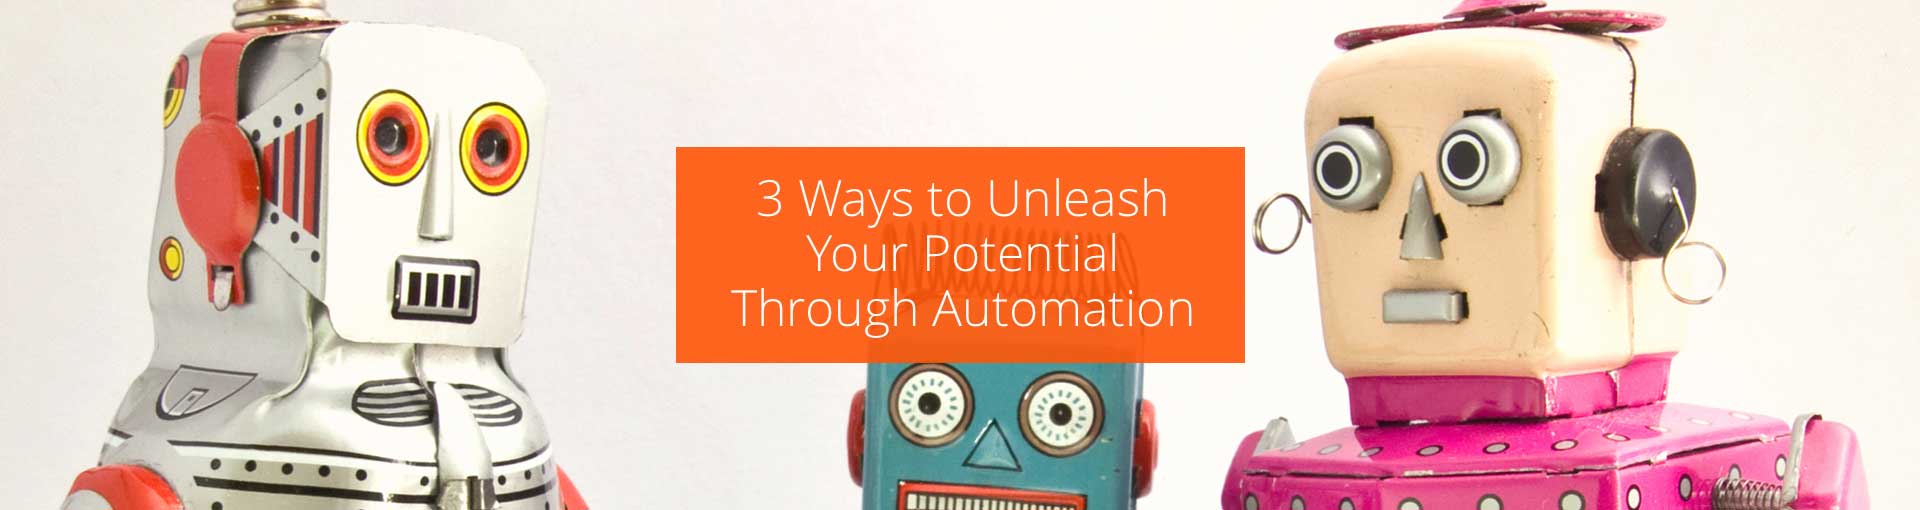 3 Ways to Unleash Your Potential Through Automation Featured Image